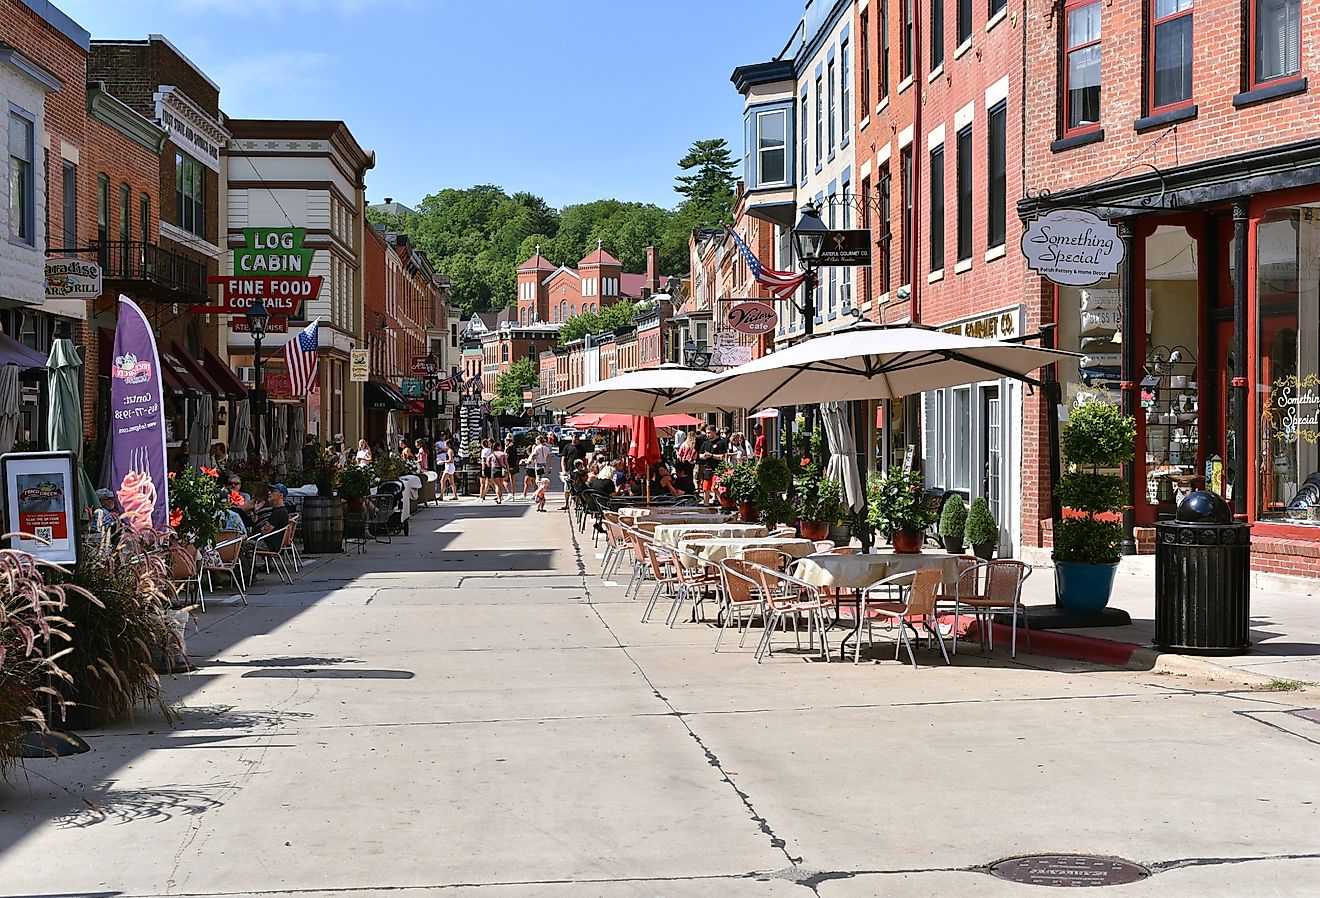 Downtown Galena, Illinois with its shops and restaurants on a warm summer day. Image credit Ben Harding via Shutterstock